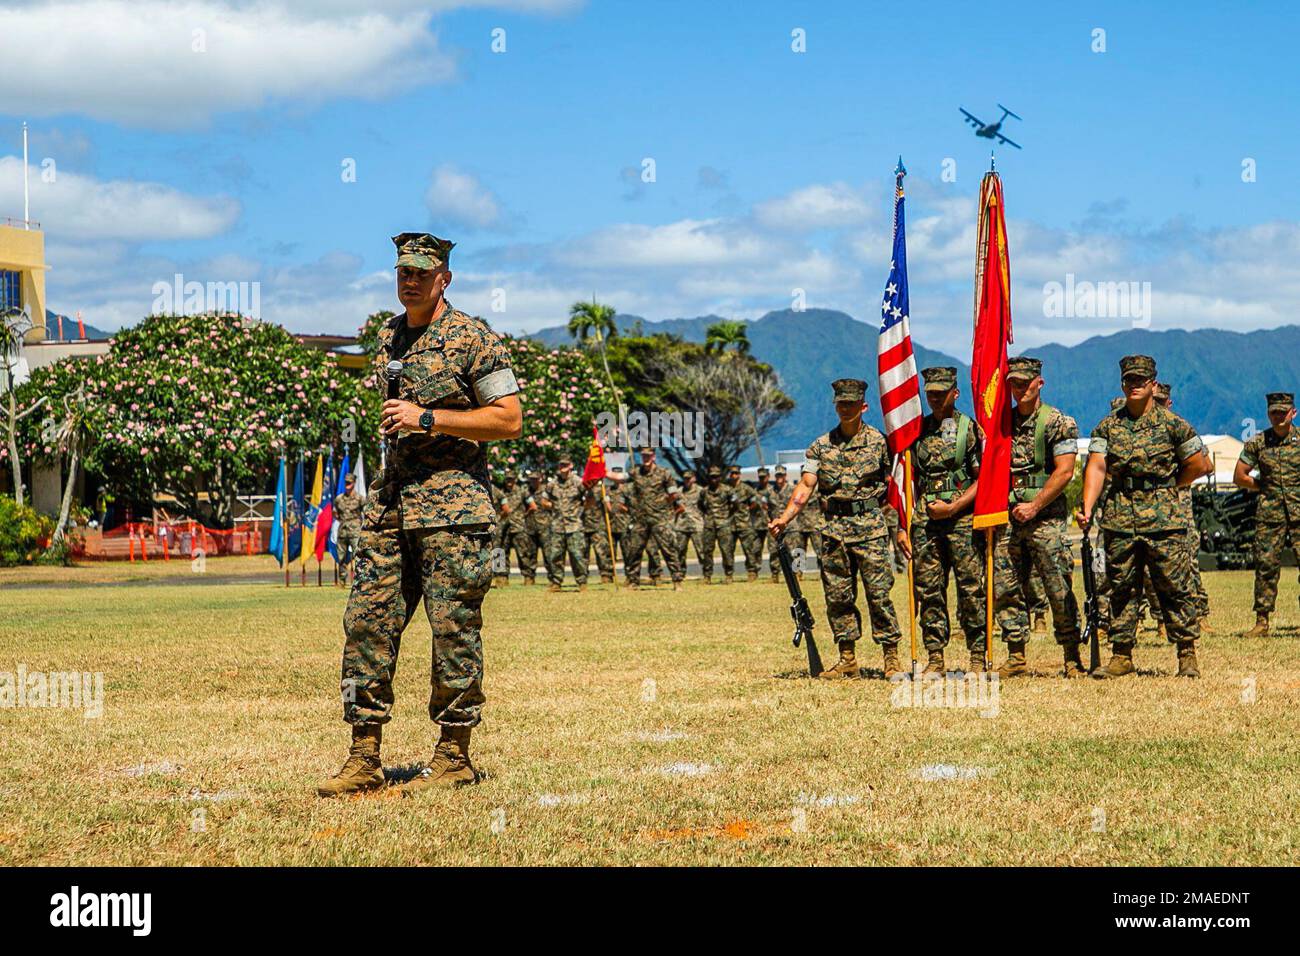 U.S. Marine Corps Lt. Col. Richard Neikirk, outgoing commanding officer, 1st Battalion, 12th Marine Regiment, addresses the audience during the unit’s change of command ceremony on Marine Corps Base Hawaii, May 26, 2022. LtCol. Neikirk relinquished command of 1st Battalion, 12th Marines to Lt. Col. Joseph Gill II. Stock Photo